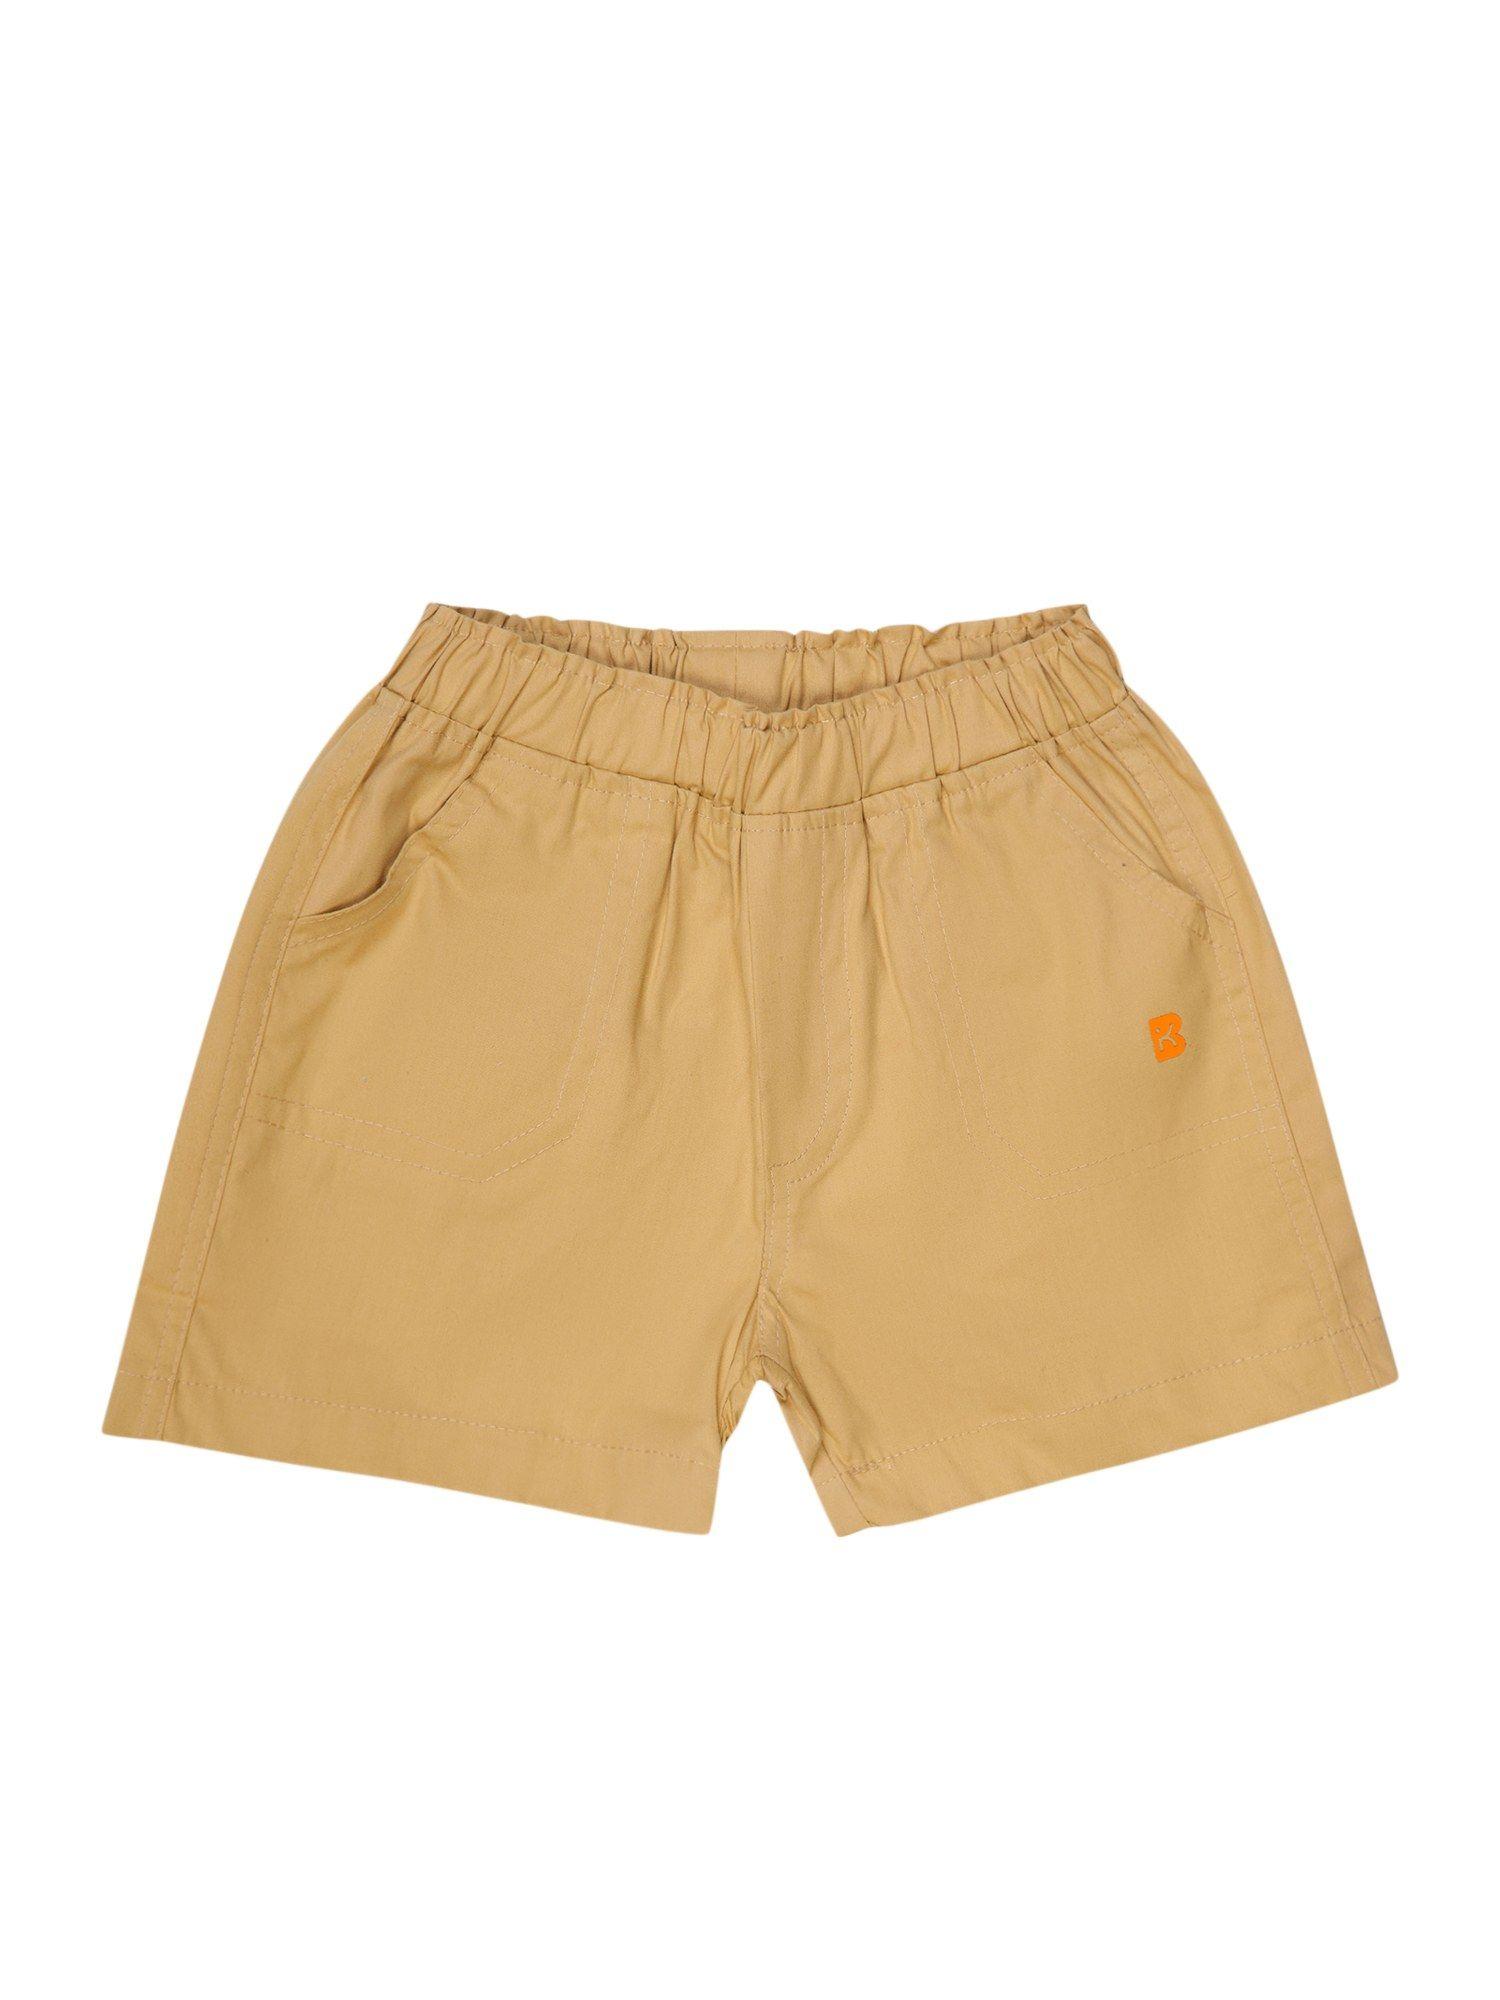 solid shorts-beige